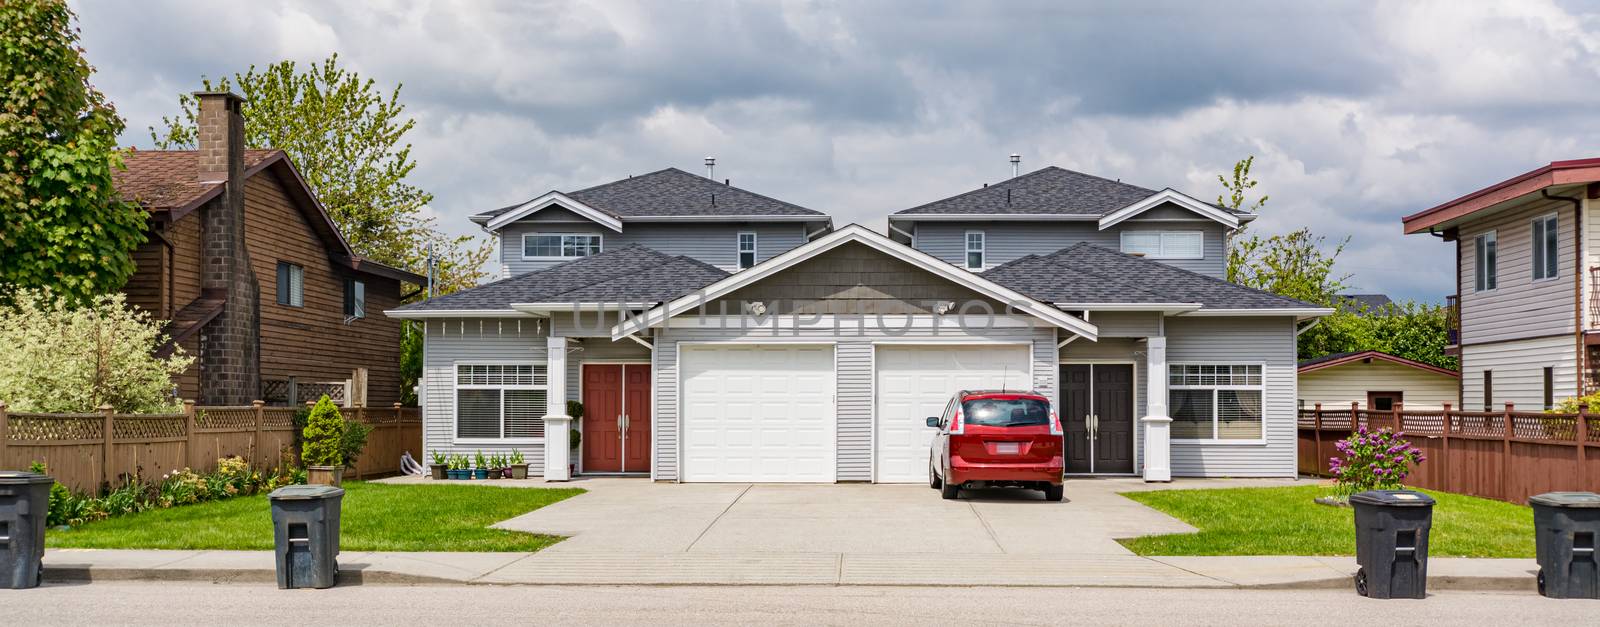 Residential duplex townhouse with red car parked on concret driveway and garbage bins on the road in front